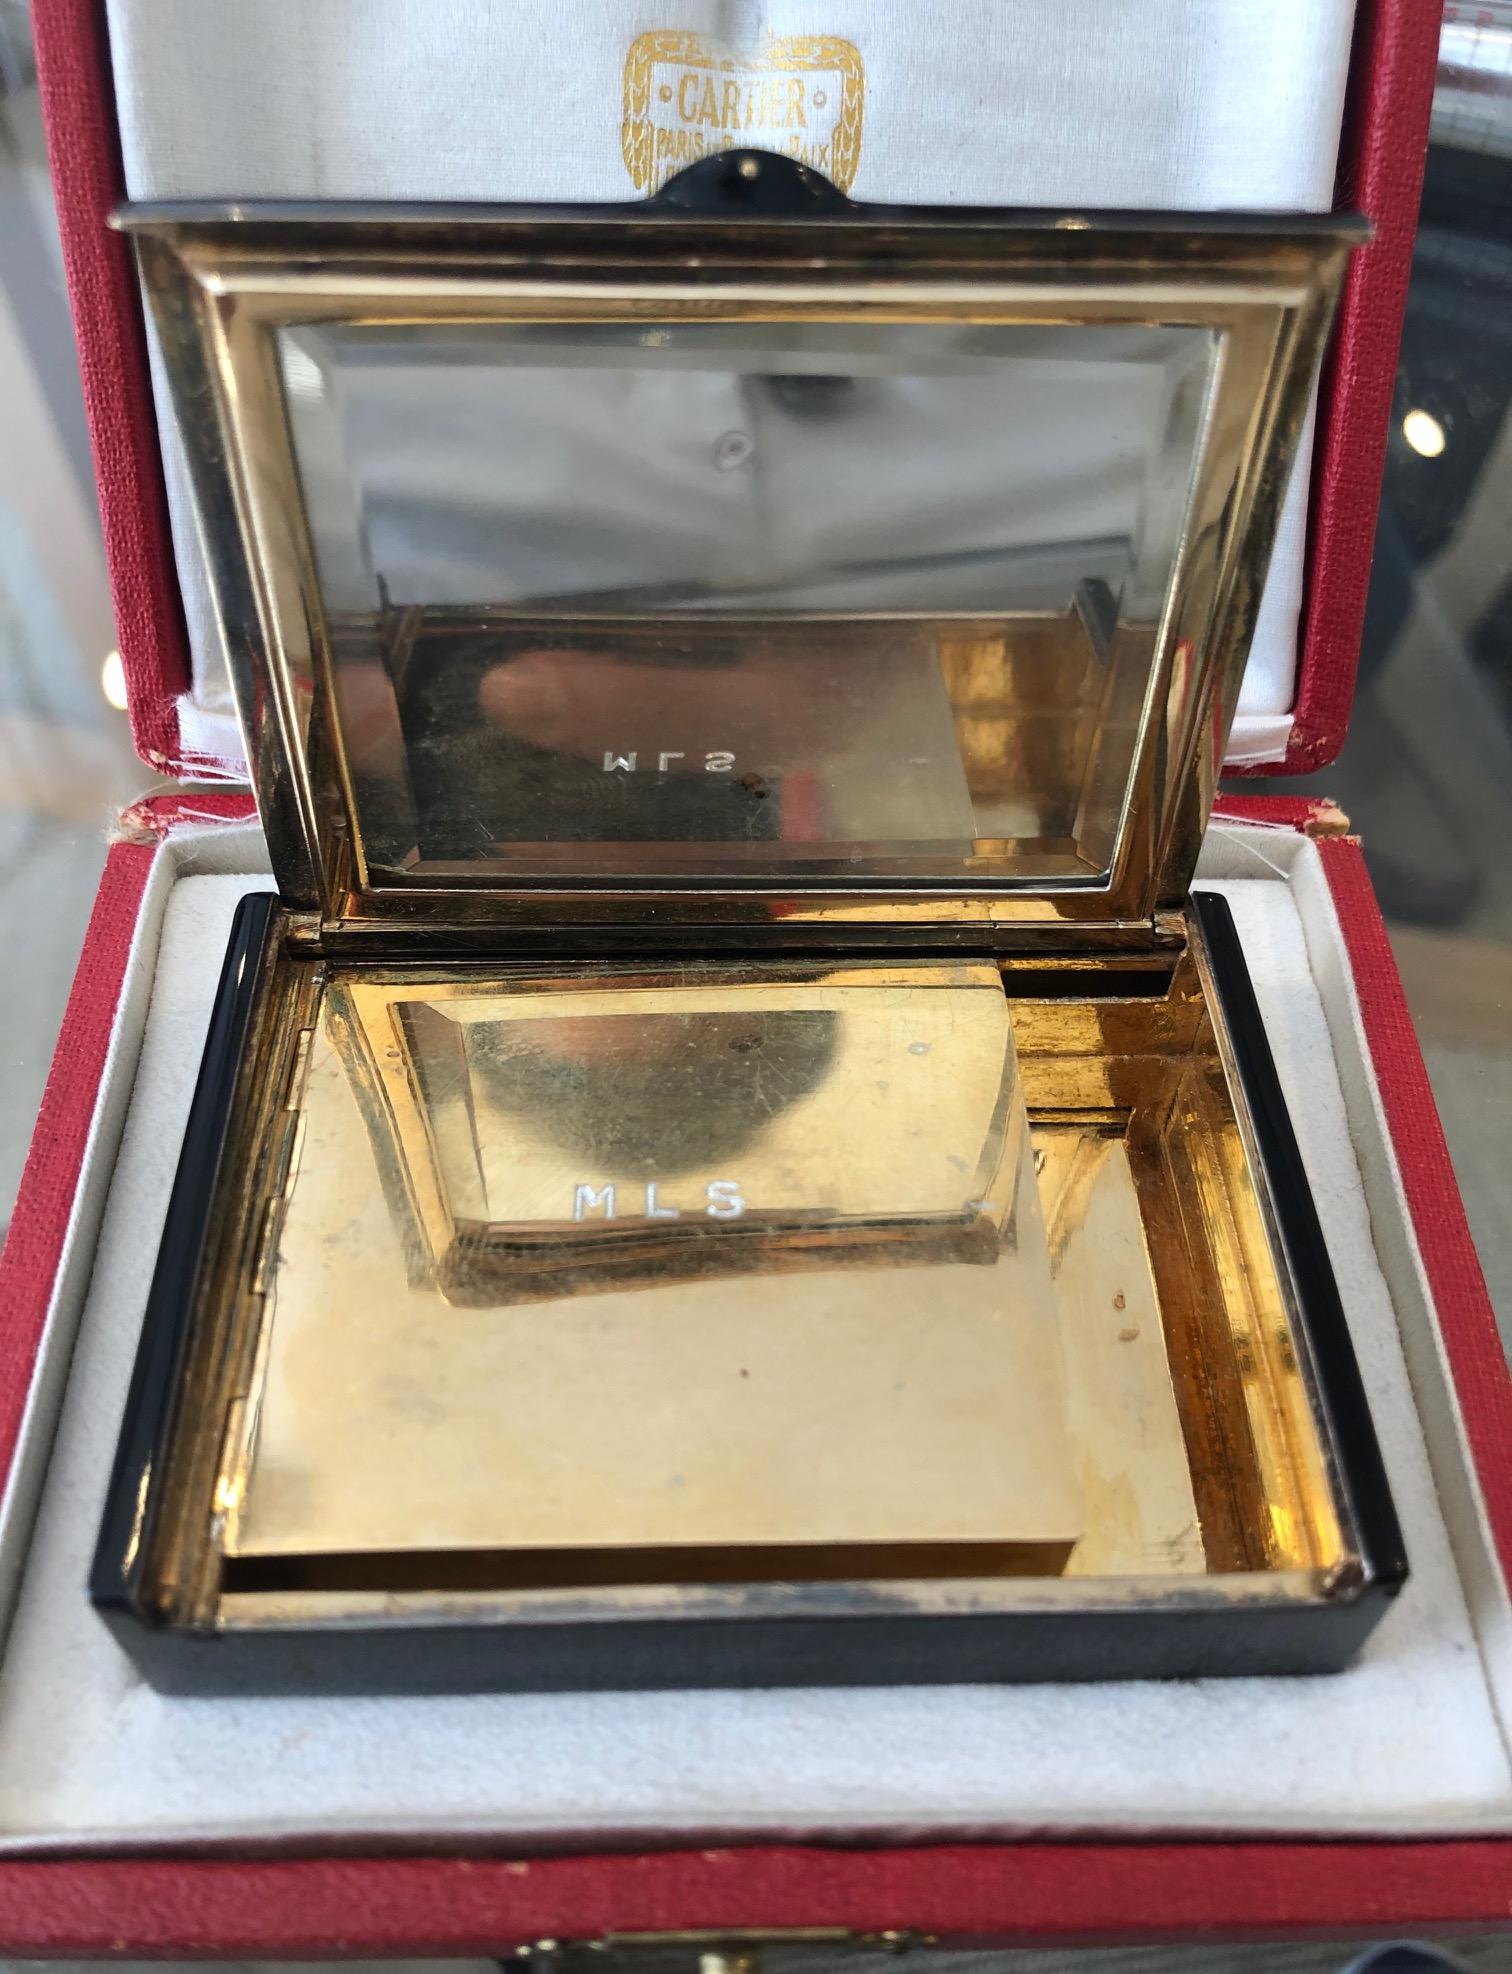 Art Deco Cartier Silver Gilt Enamel and Diamond Compact in Original Fitted Box. This beautifully made box comes in its original fitted box and dates from around 1920.
Free shipping
